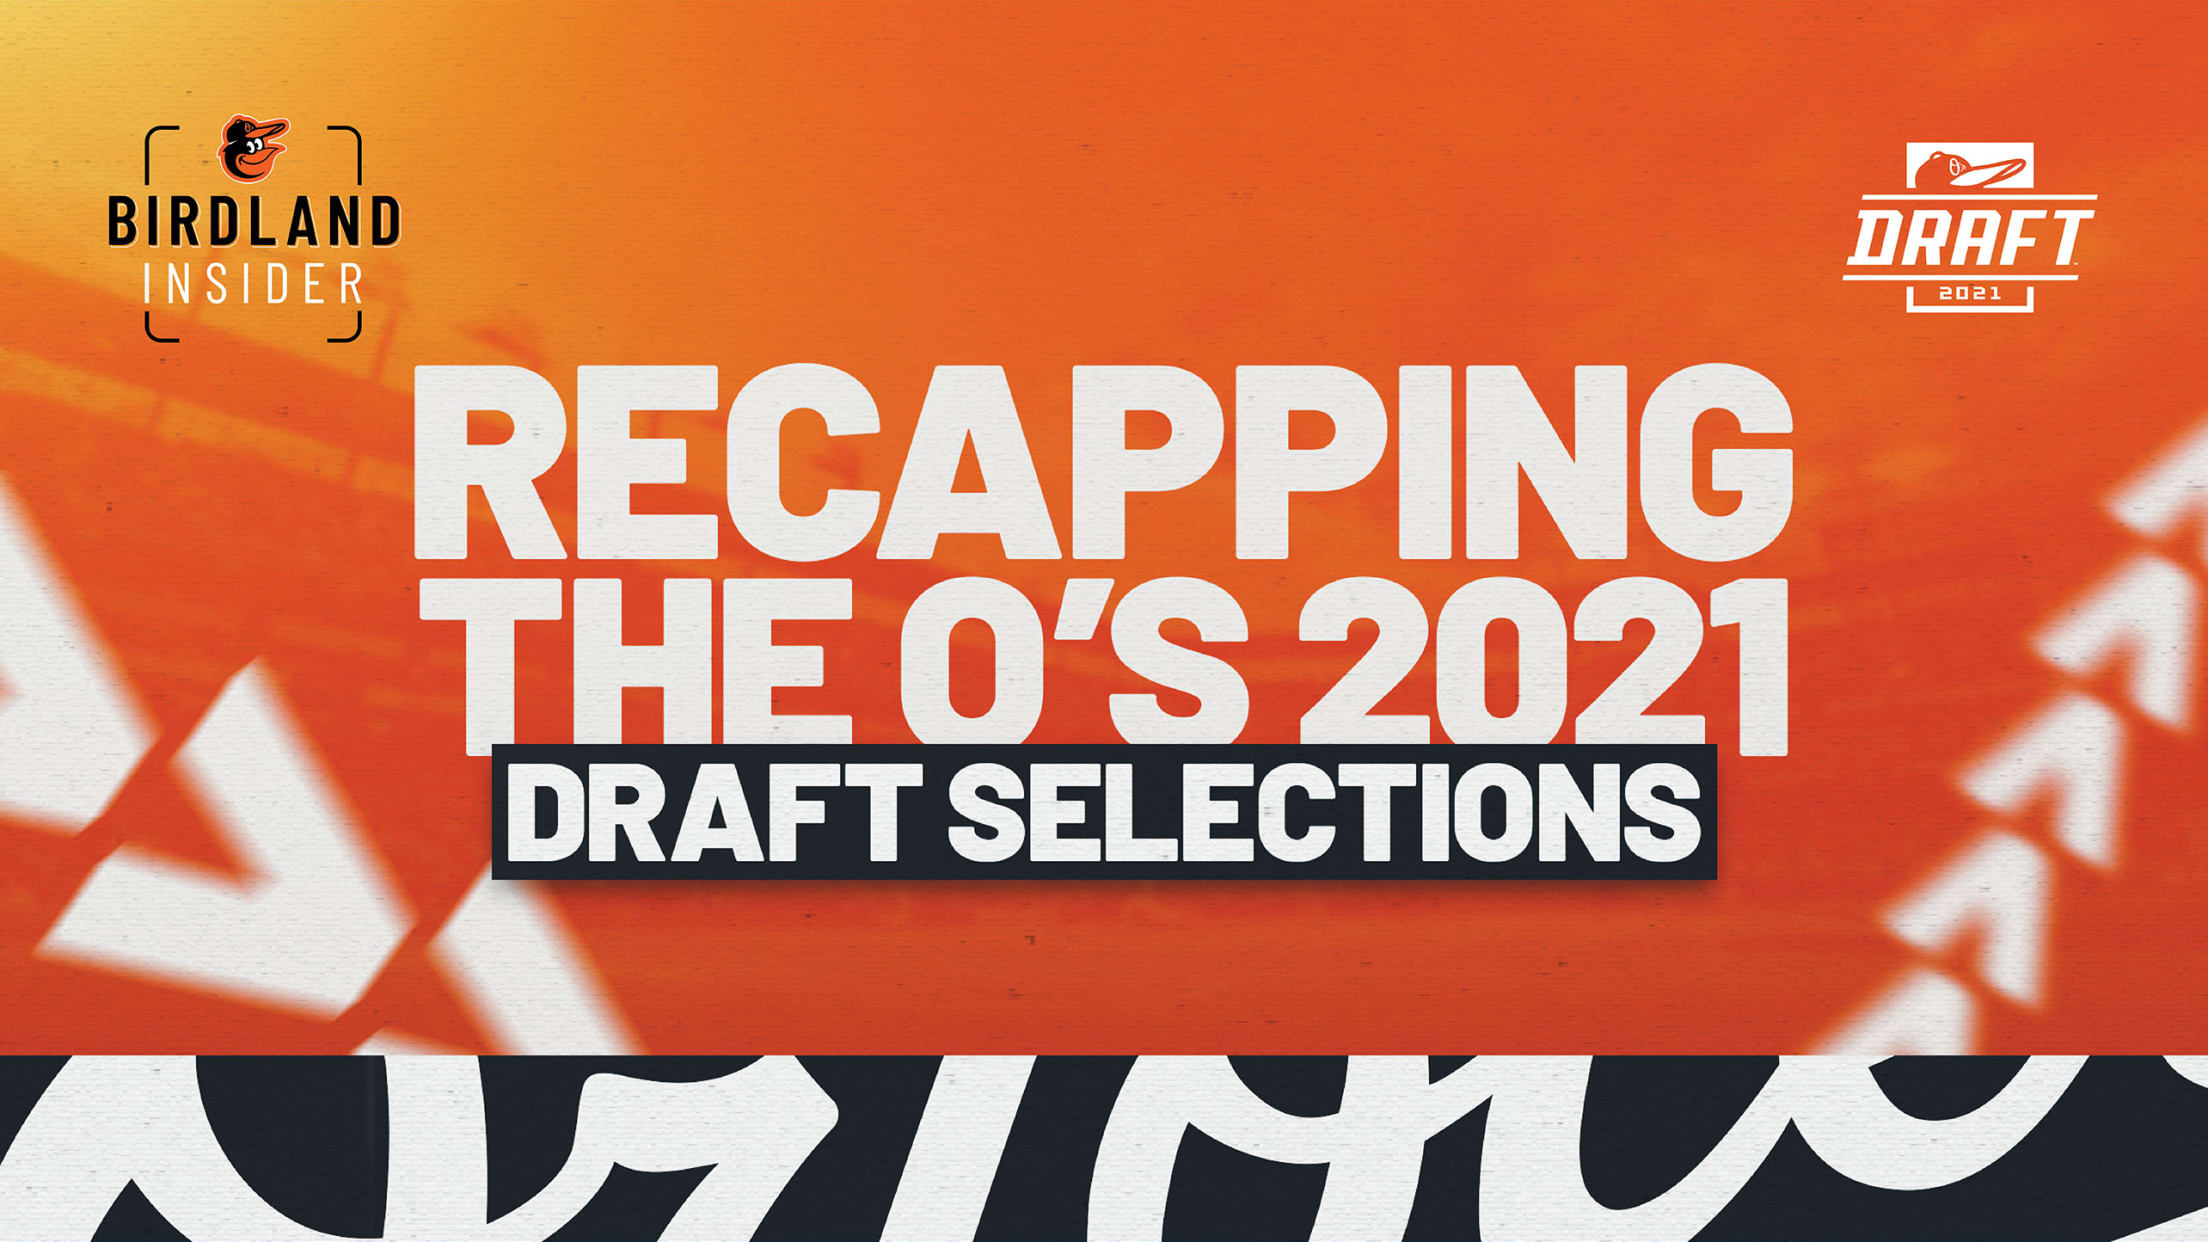 bal-recapping-the-os-2021-draft-selections-2568x1445